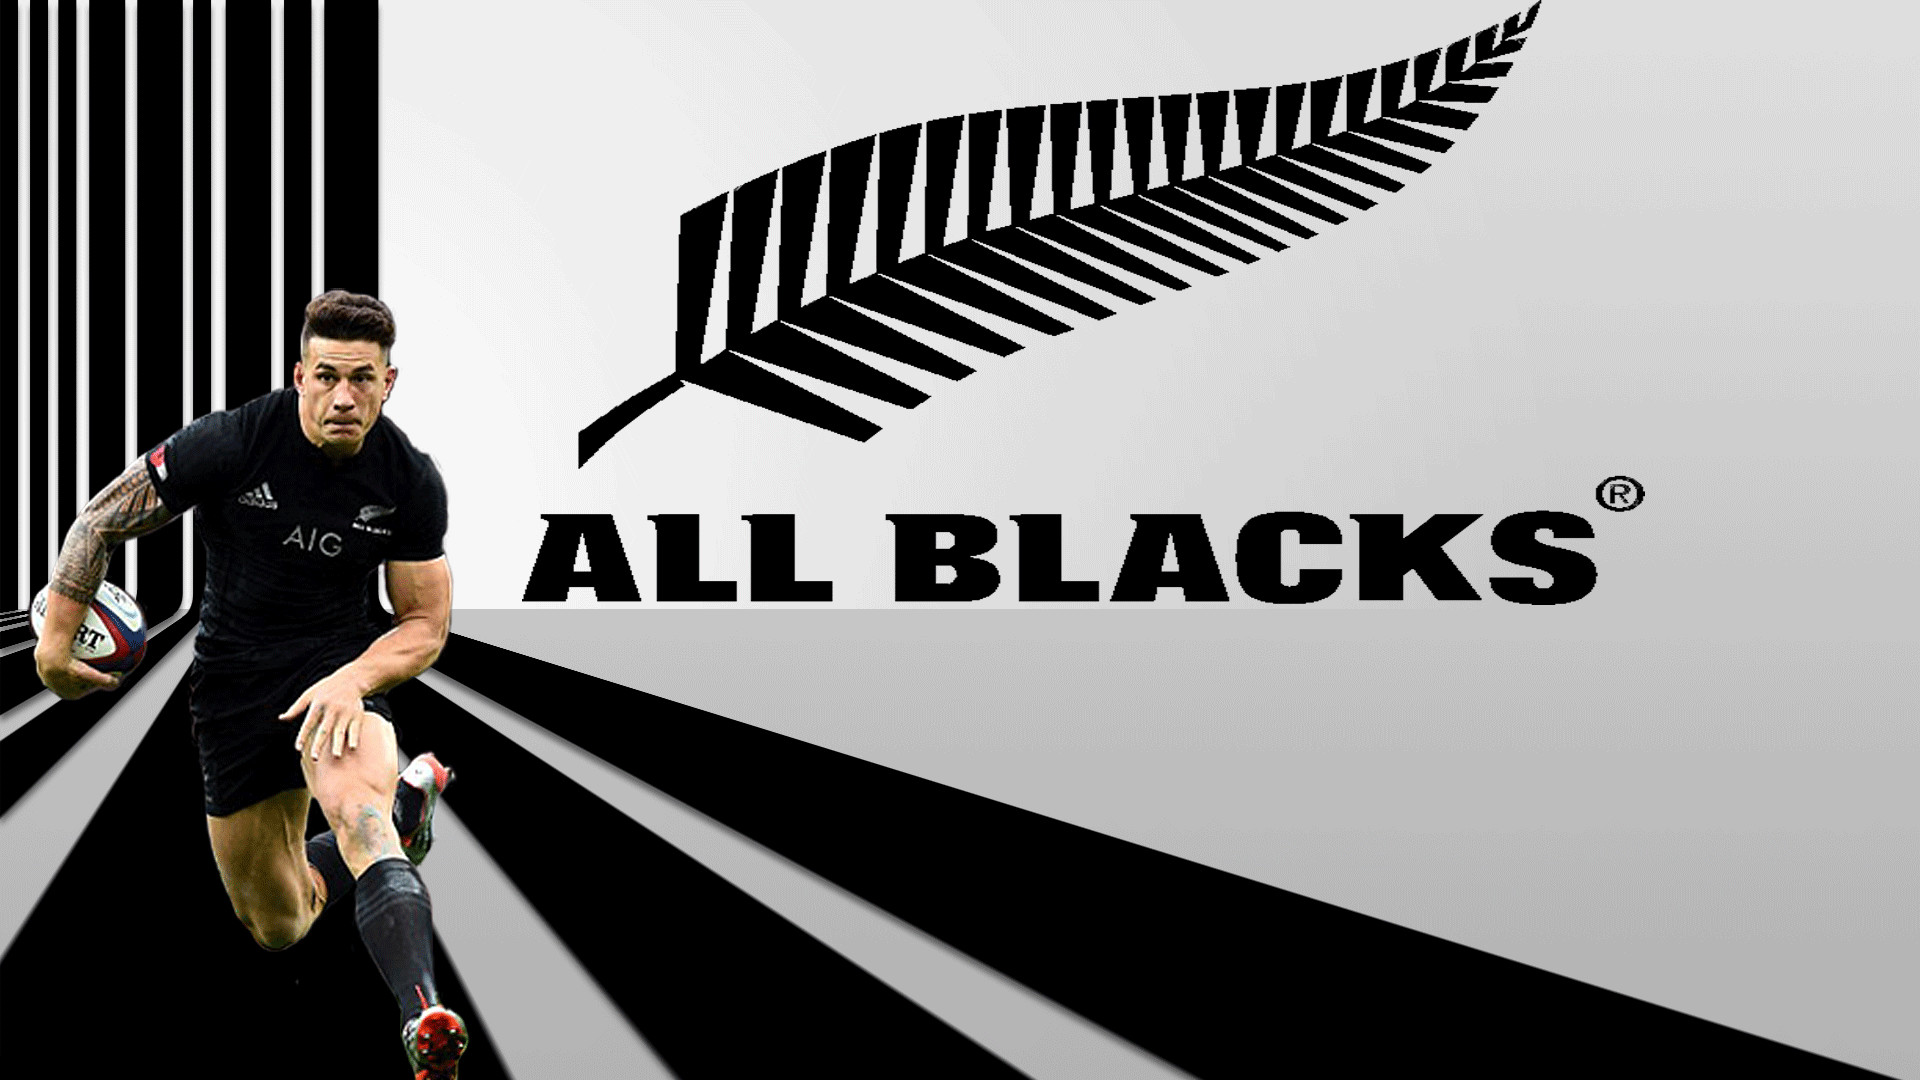 1920x1080 All Blacks rugby - Sonny Bill Williams - Poster created by Gordon Tunstall  using Adobe Photoshop